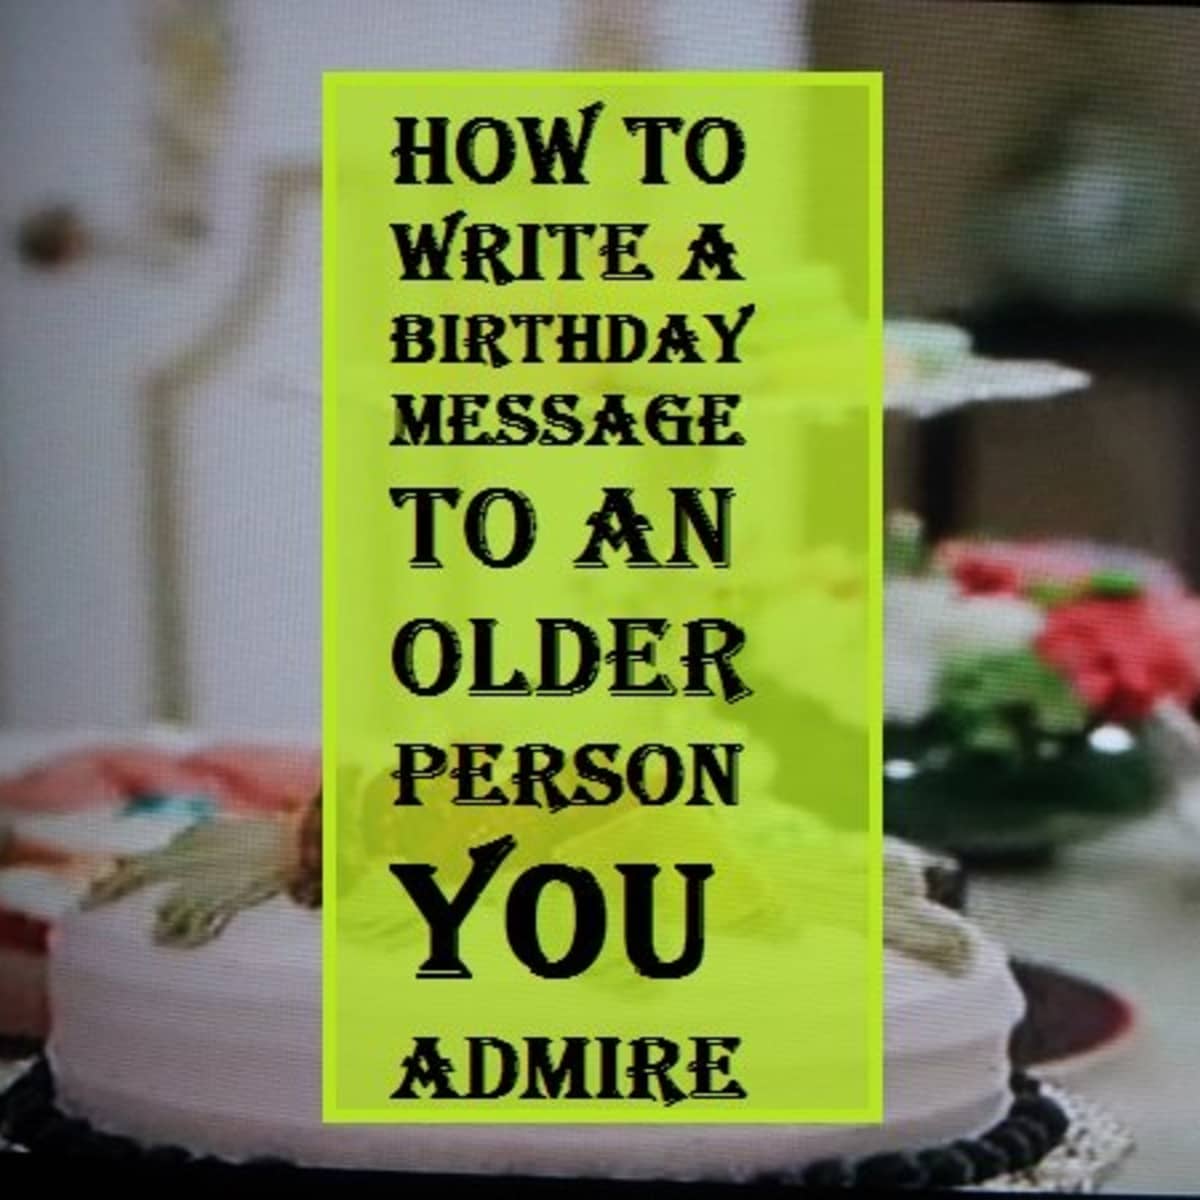 How to Write a Birthday Message to an Older Person You Admire